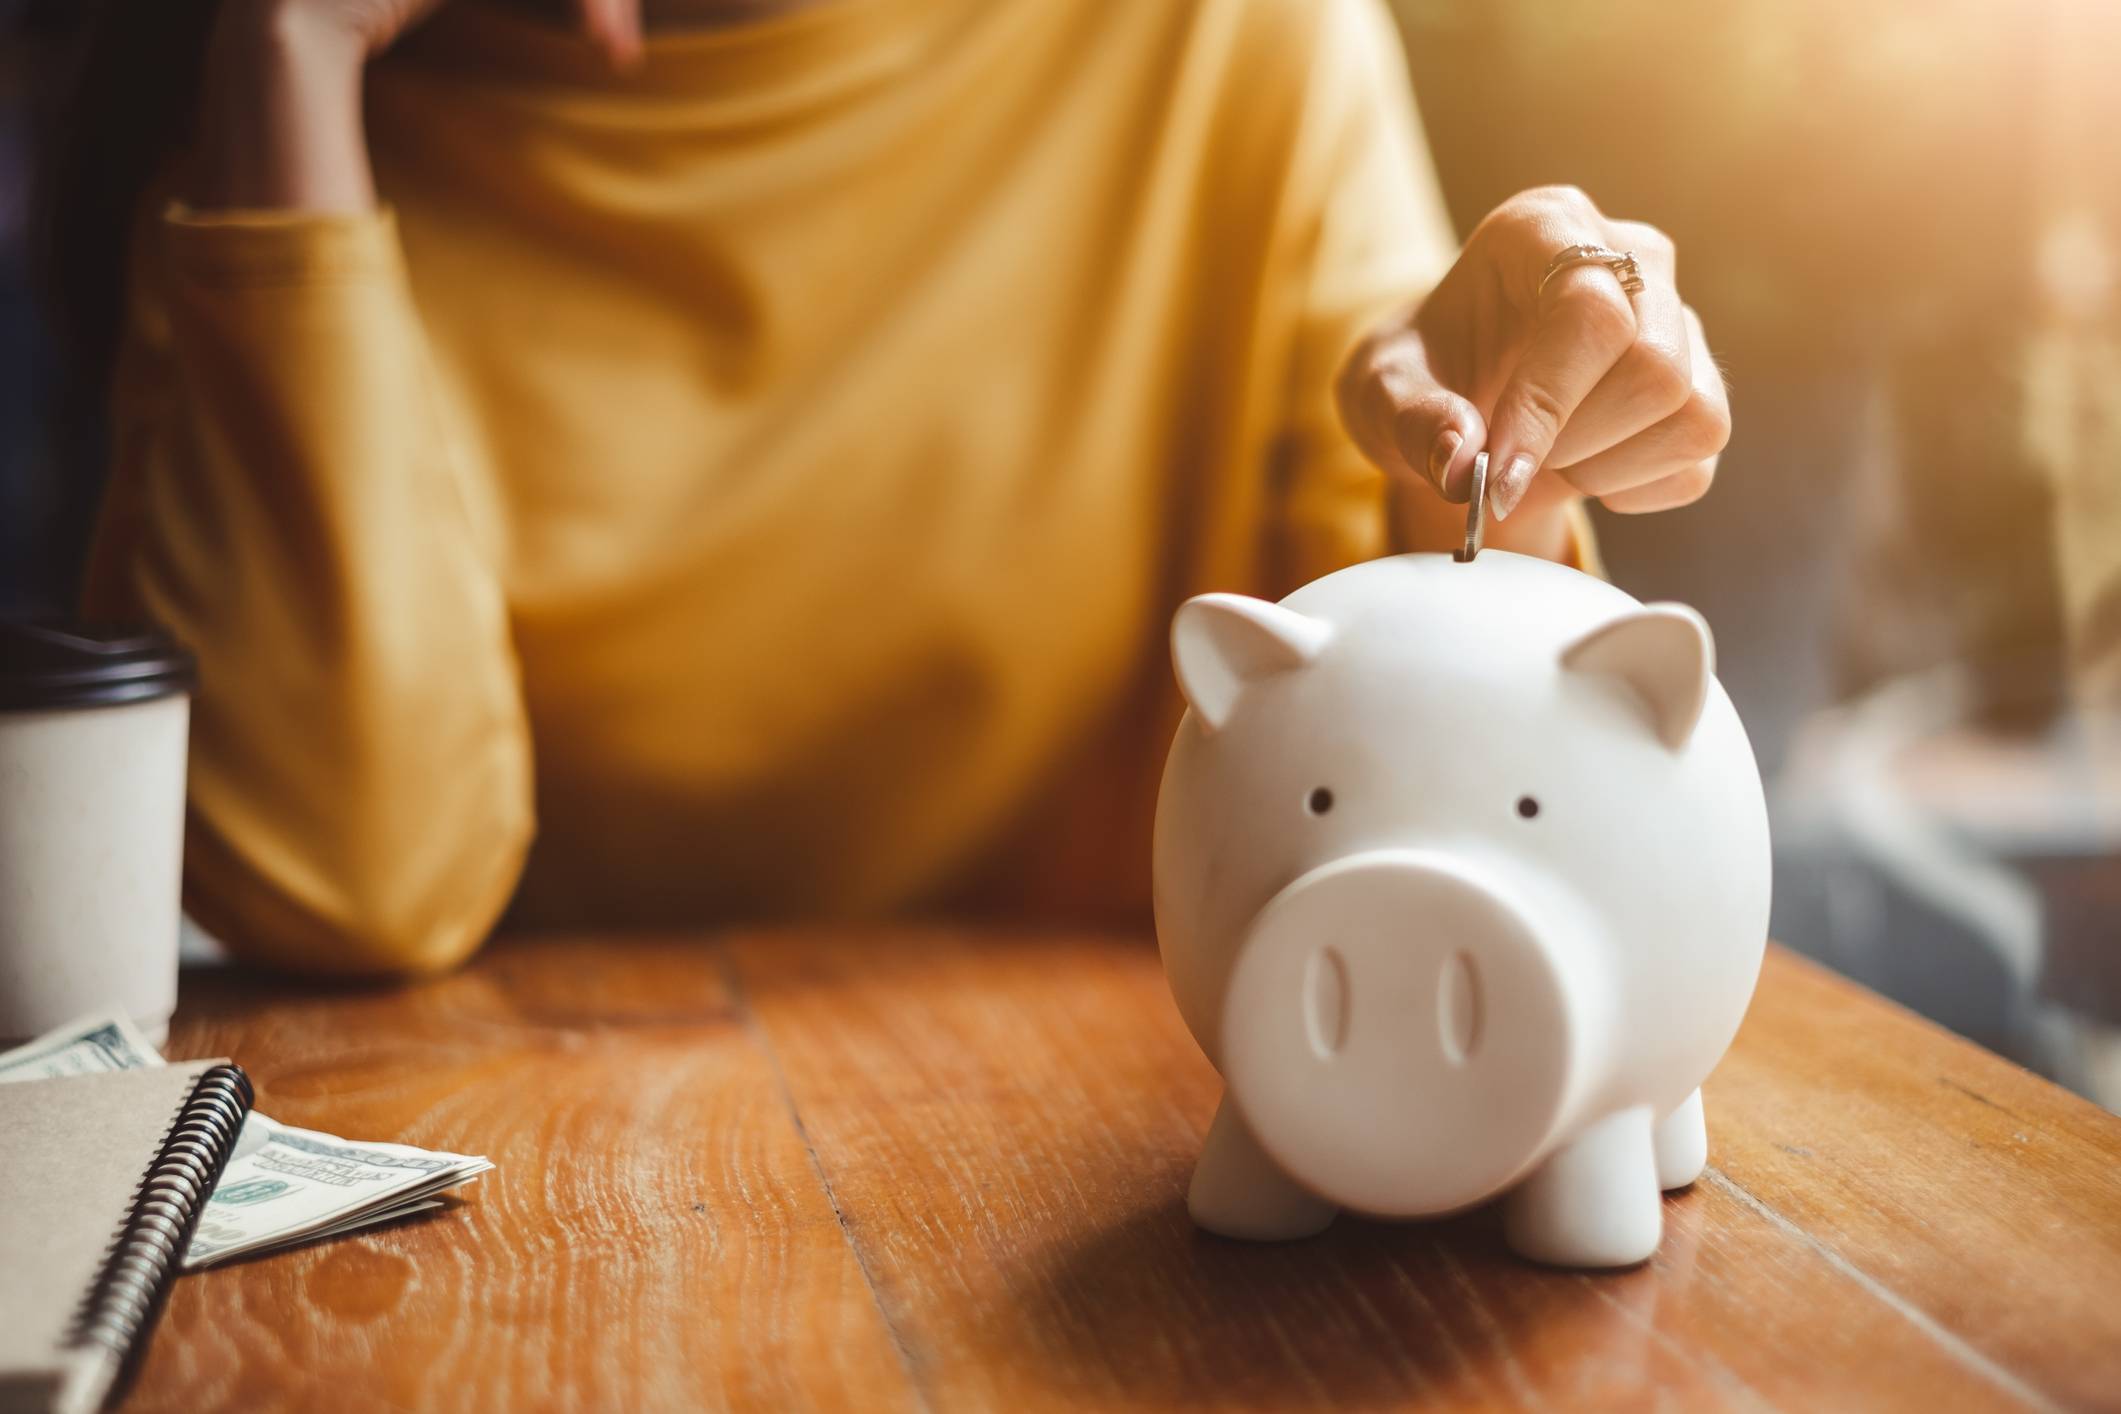 How Does Inflation Affect Savings?